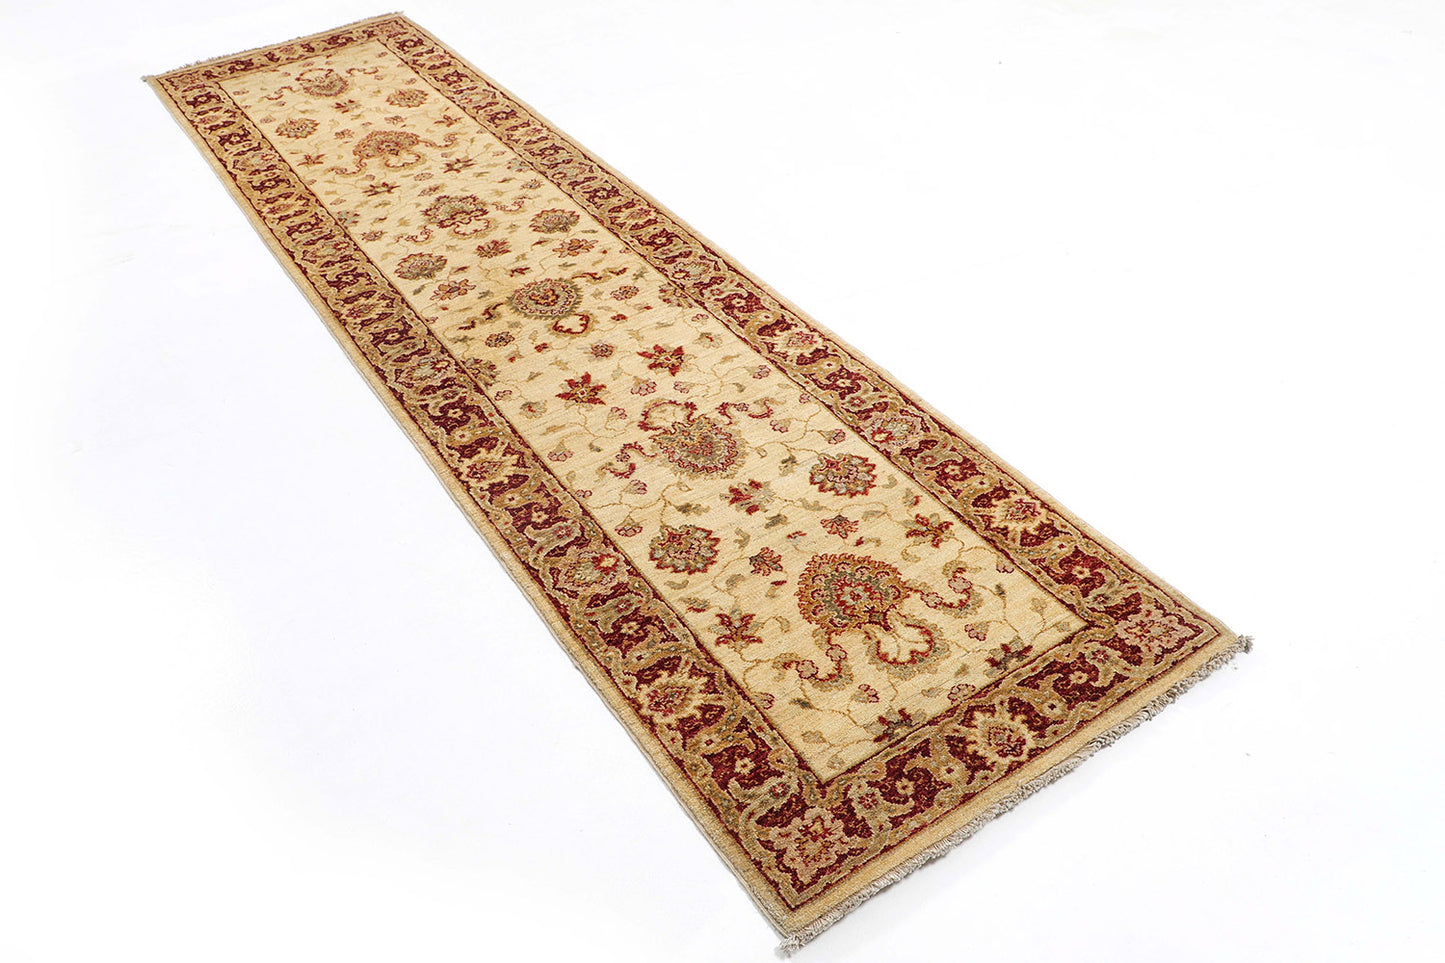 2.5x10 Hand-Knotted Ariana Carpet 2'.7" X 10' Traditional, Ivory Fine Wool Runner Rug D40666